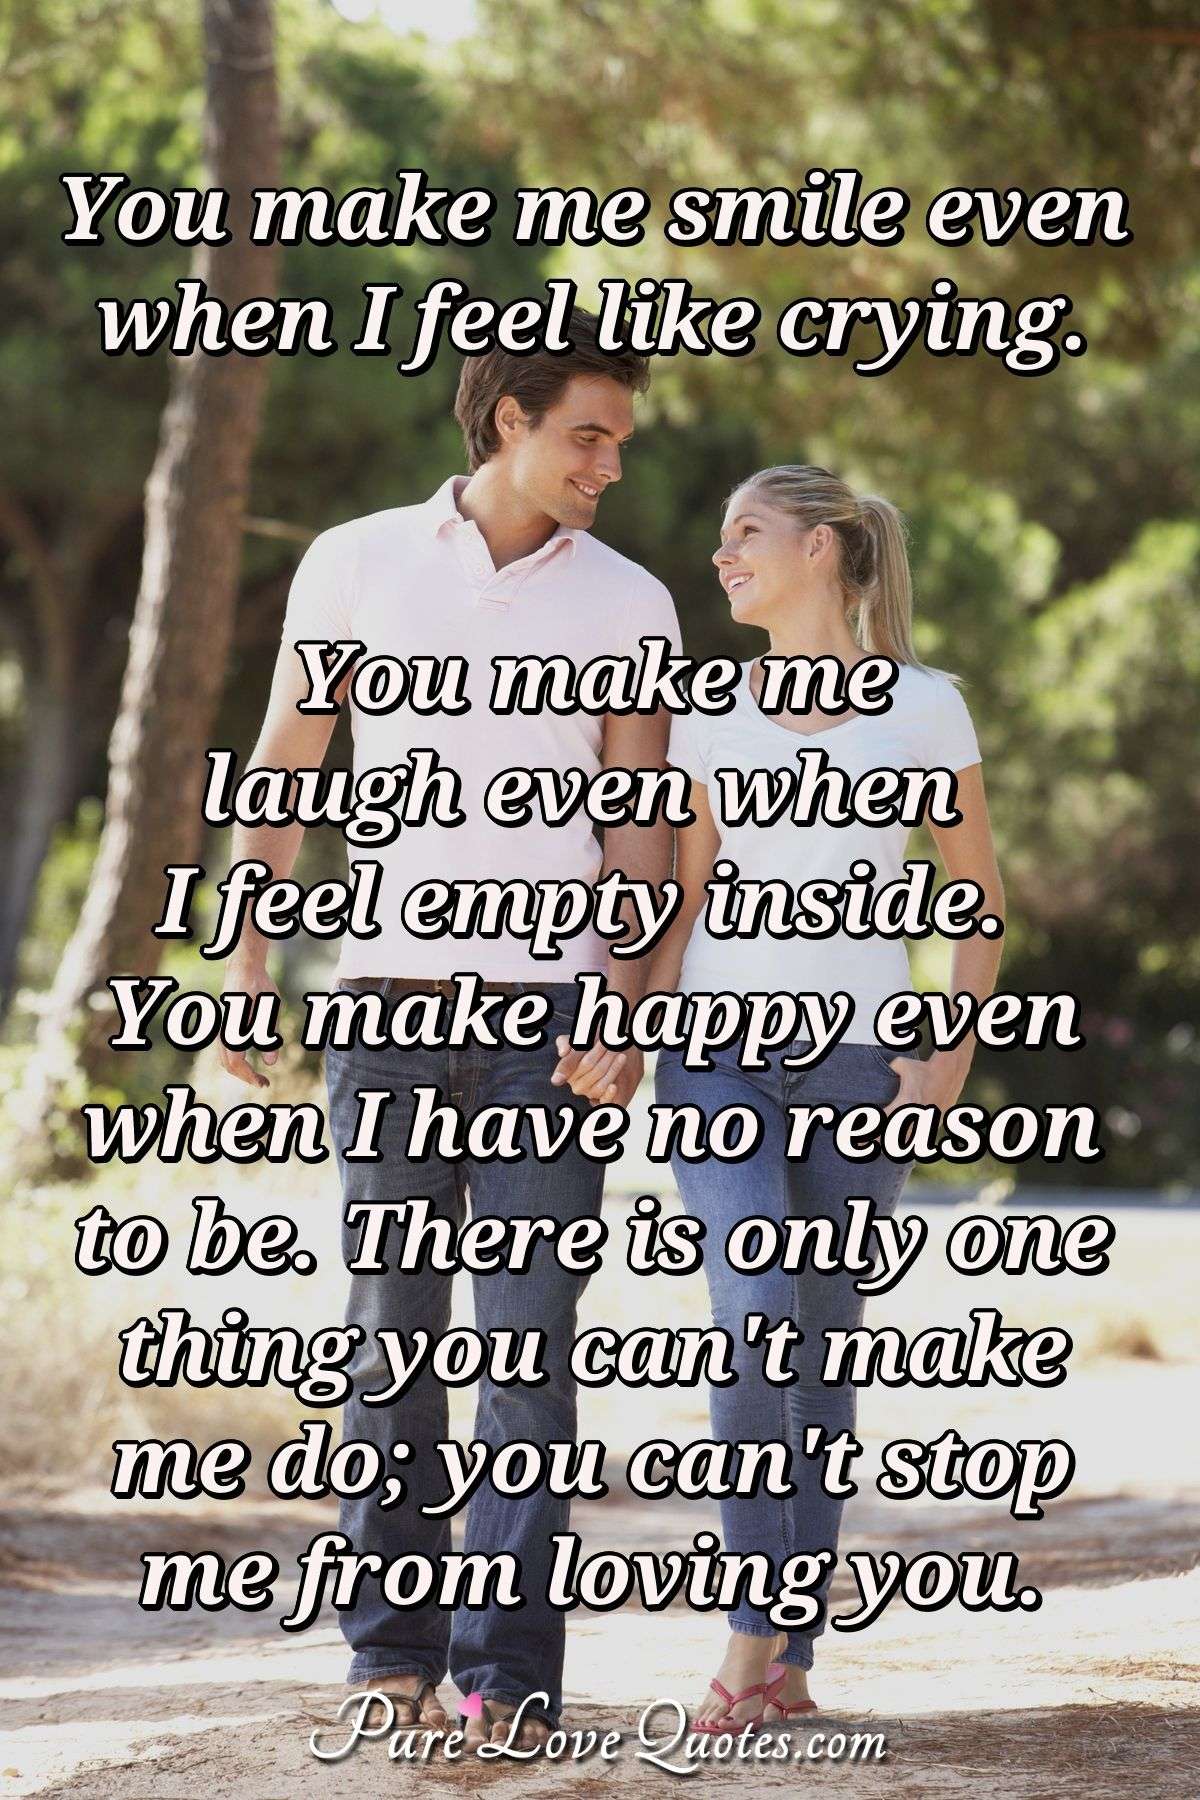 You make me smile even when I feel like crying. You make me laugh even when I feel empty inside. You make happy even when I have no reason to be. There is only one thing you can't make me do; you can't stop me from loving you. - Anonymous